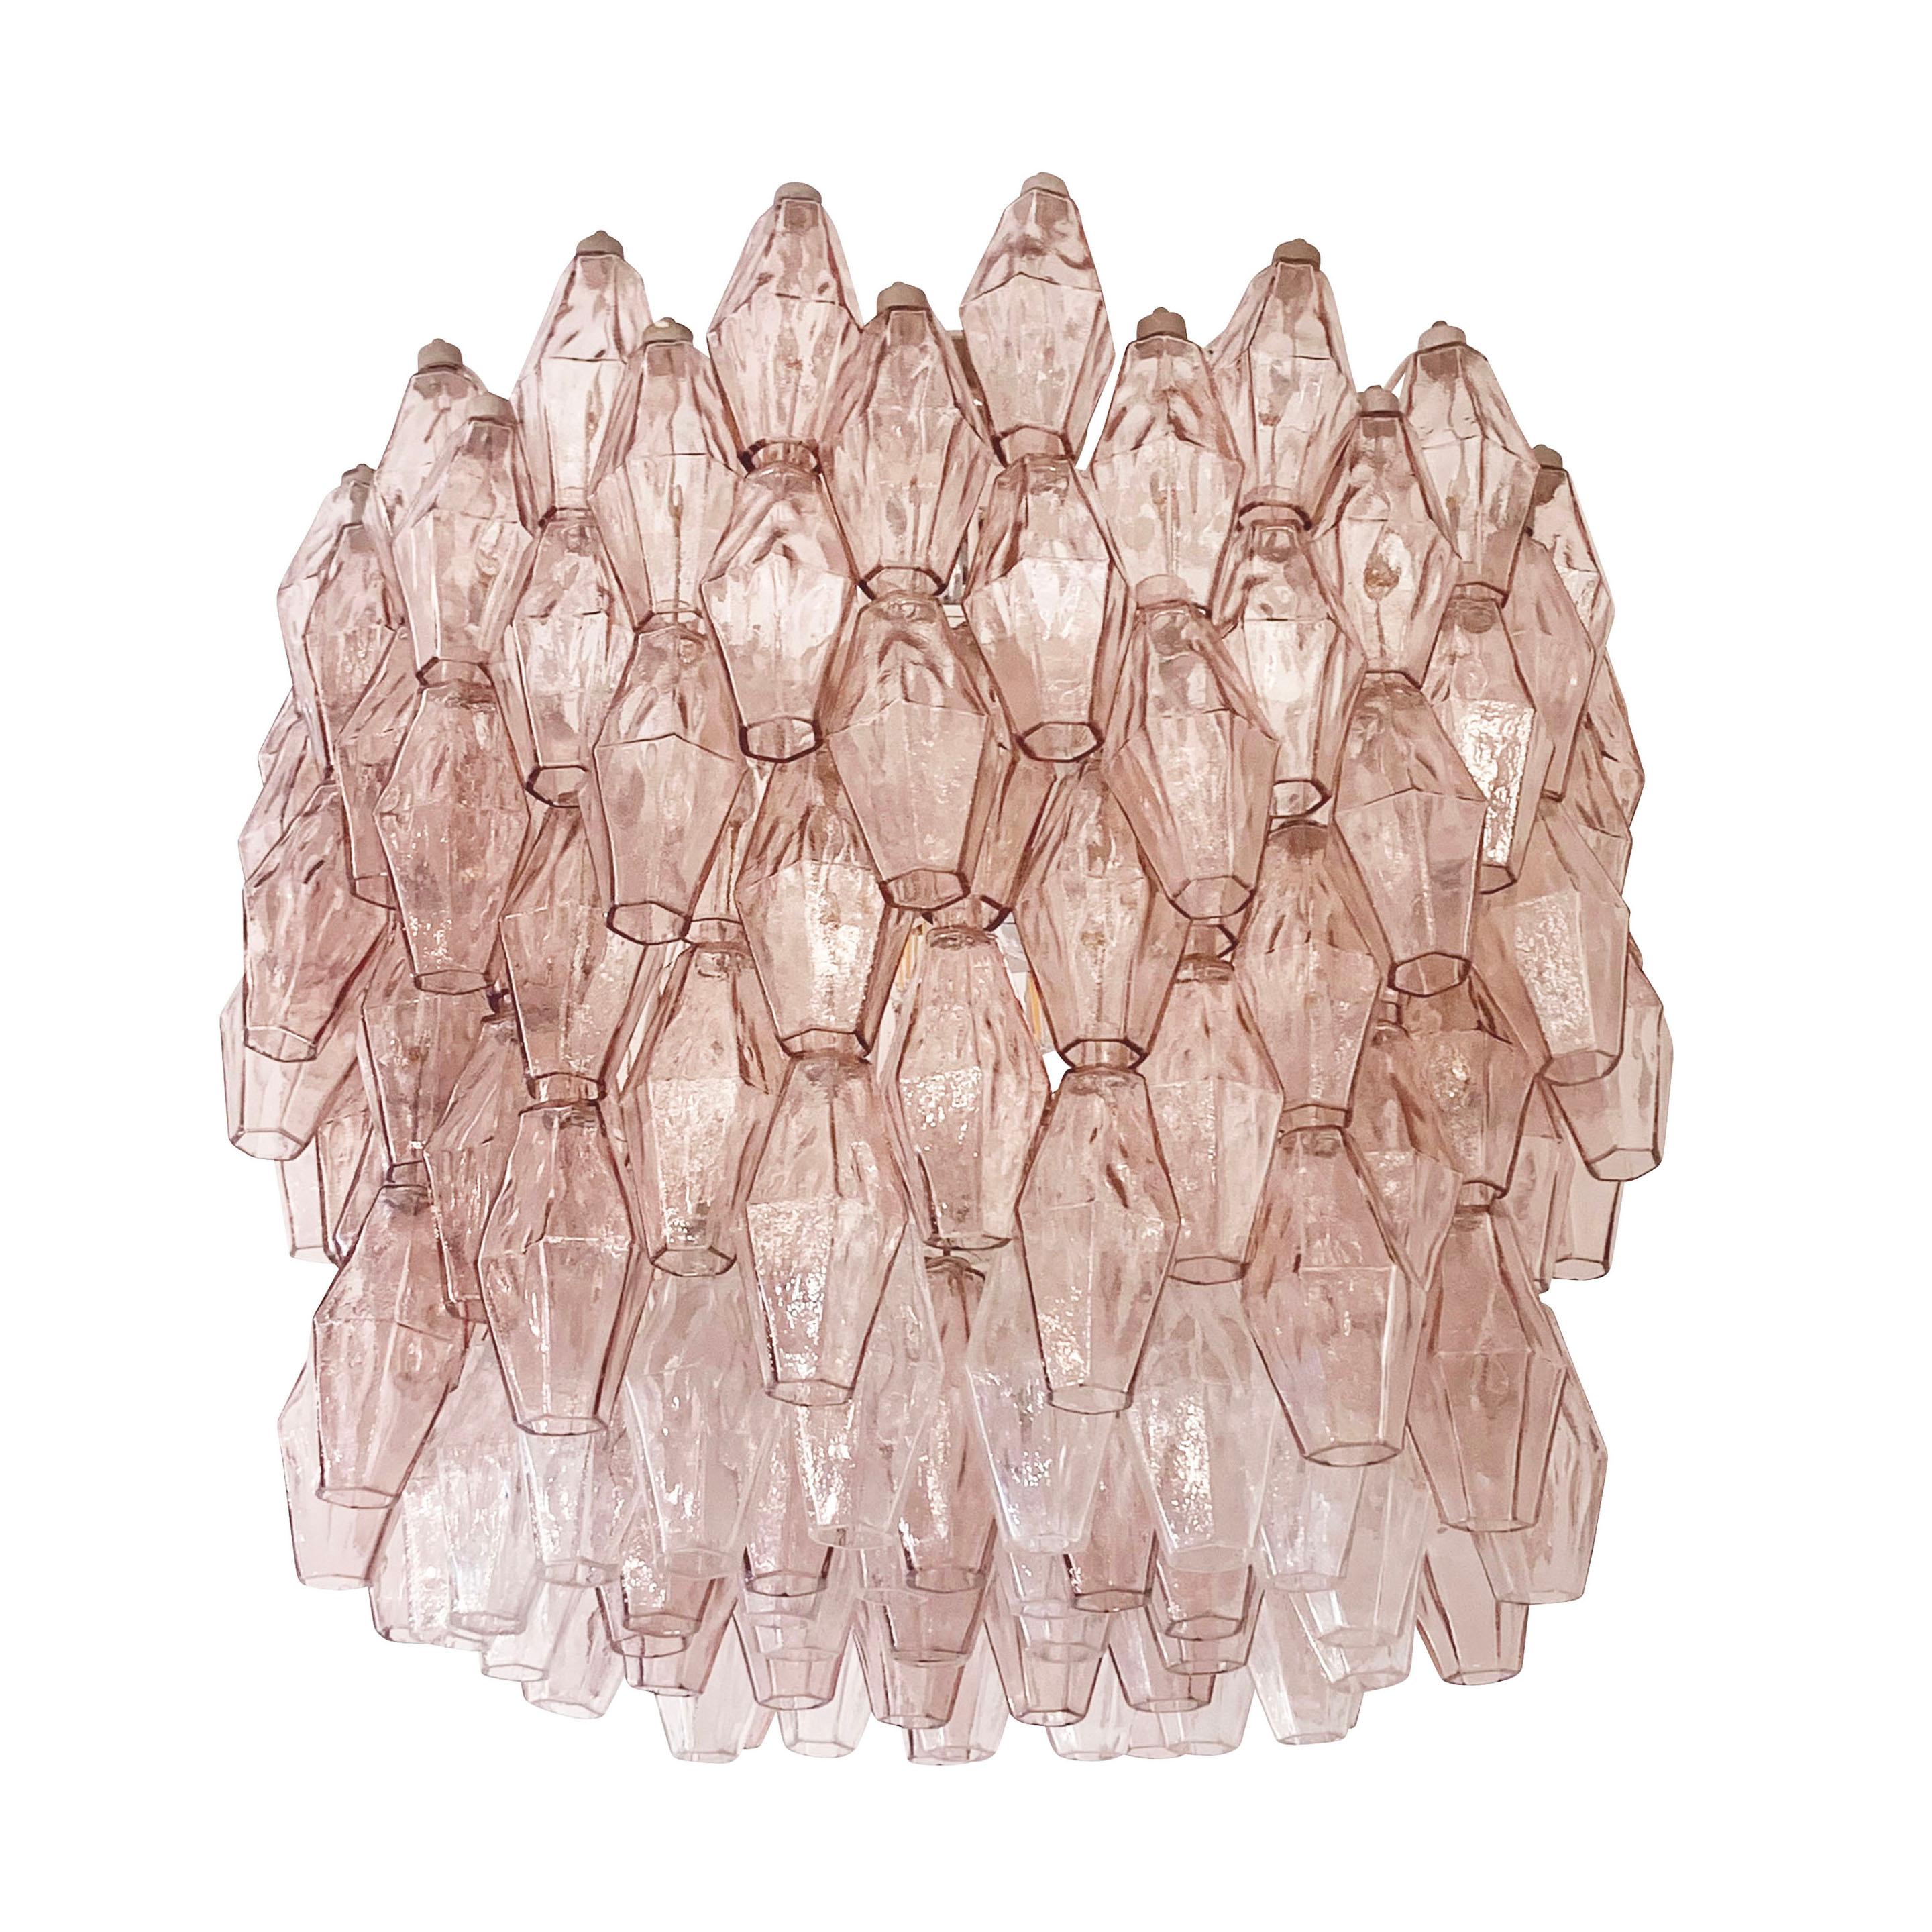 Large Italian Mid-Century chandelier by Venini with dozens of rose colored handblown polyhedral Murano glasses. White frame with manufacturer’s mark still present. Nickel canopy.

Condition: Excellent vintage condition, minor wear and chips